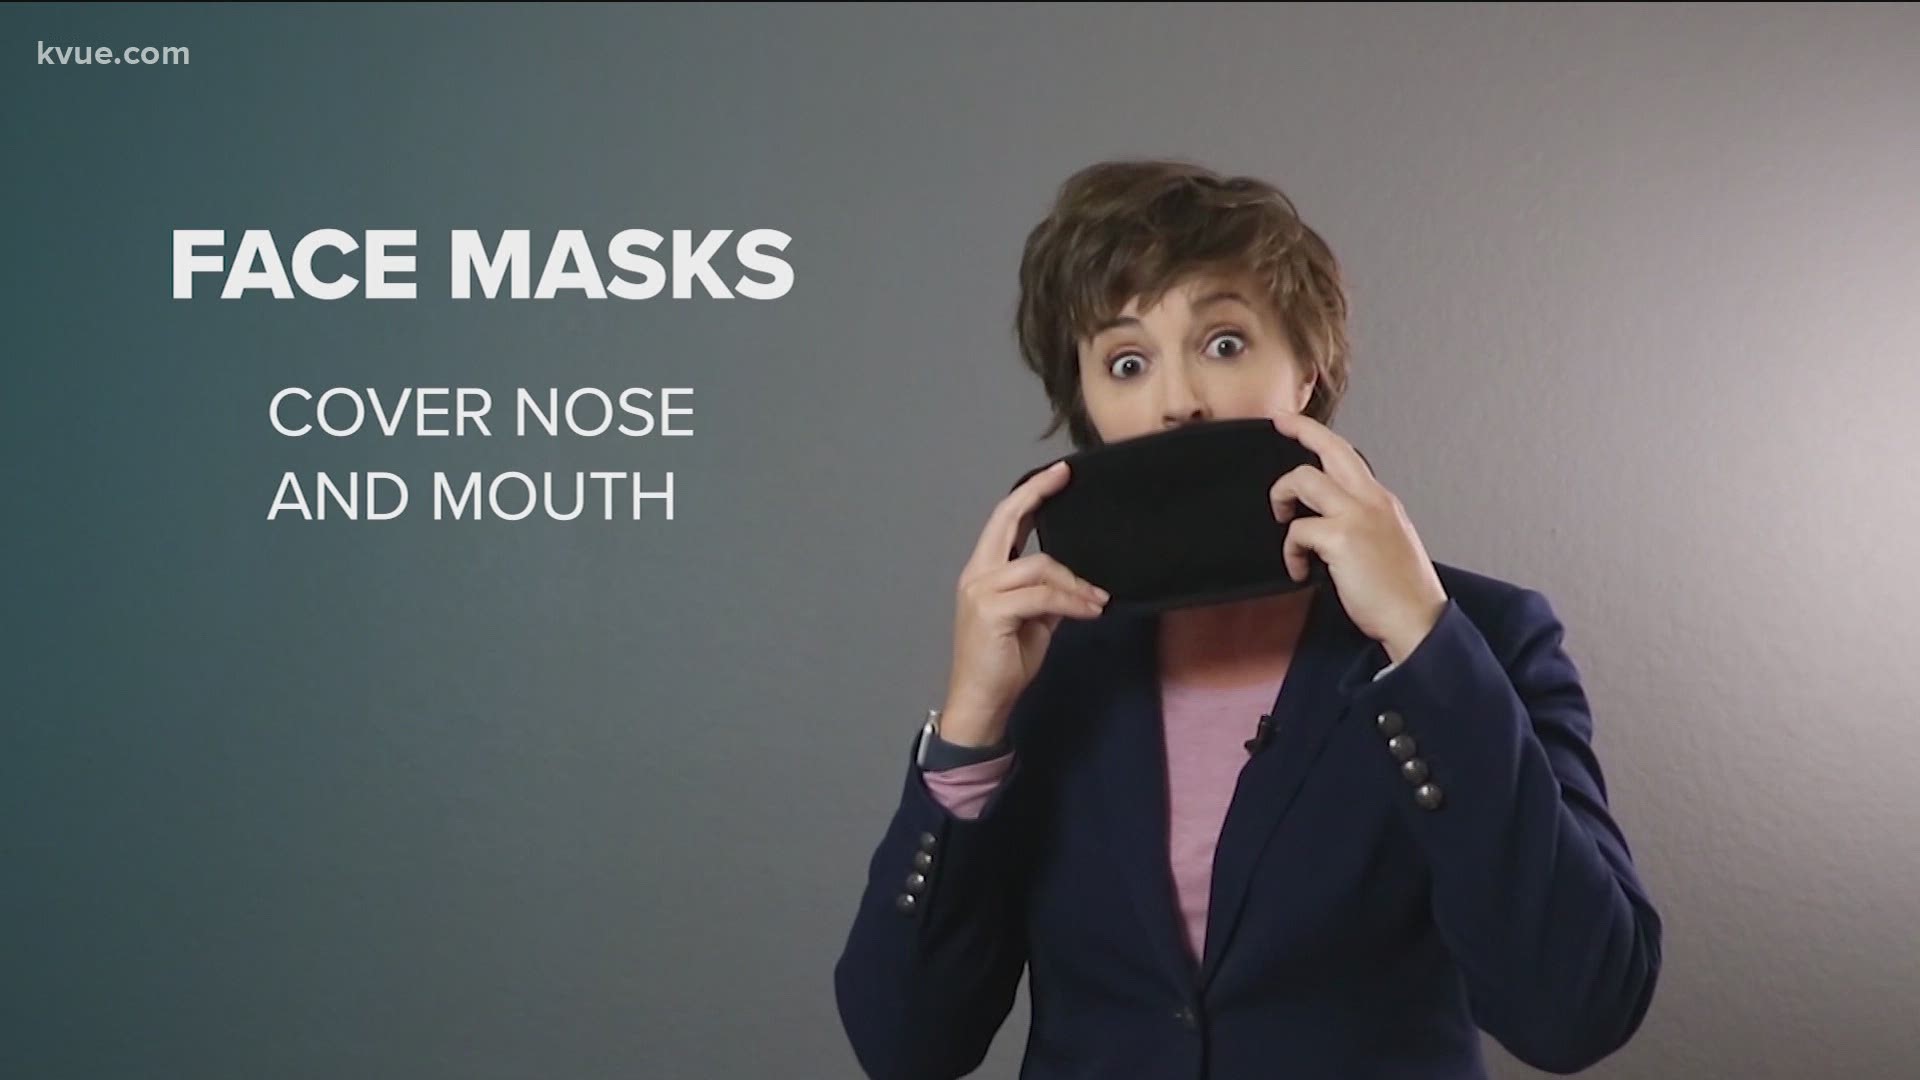 The CDC gave more guidance on mask safety against COVID-19. Erica Proffer tells us what they said about the material used to make these masks.